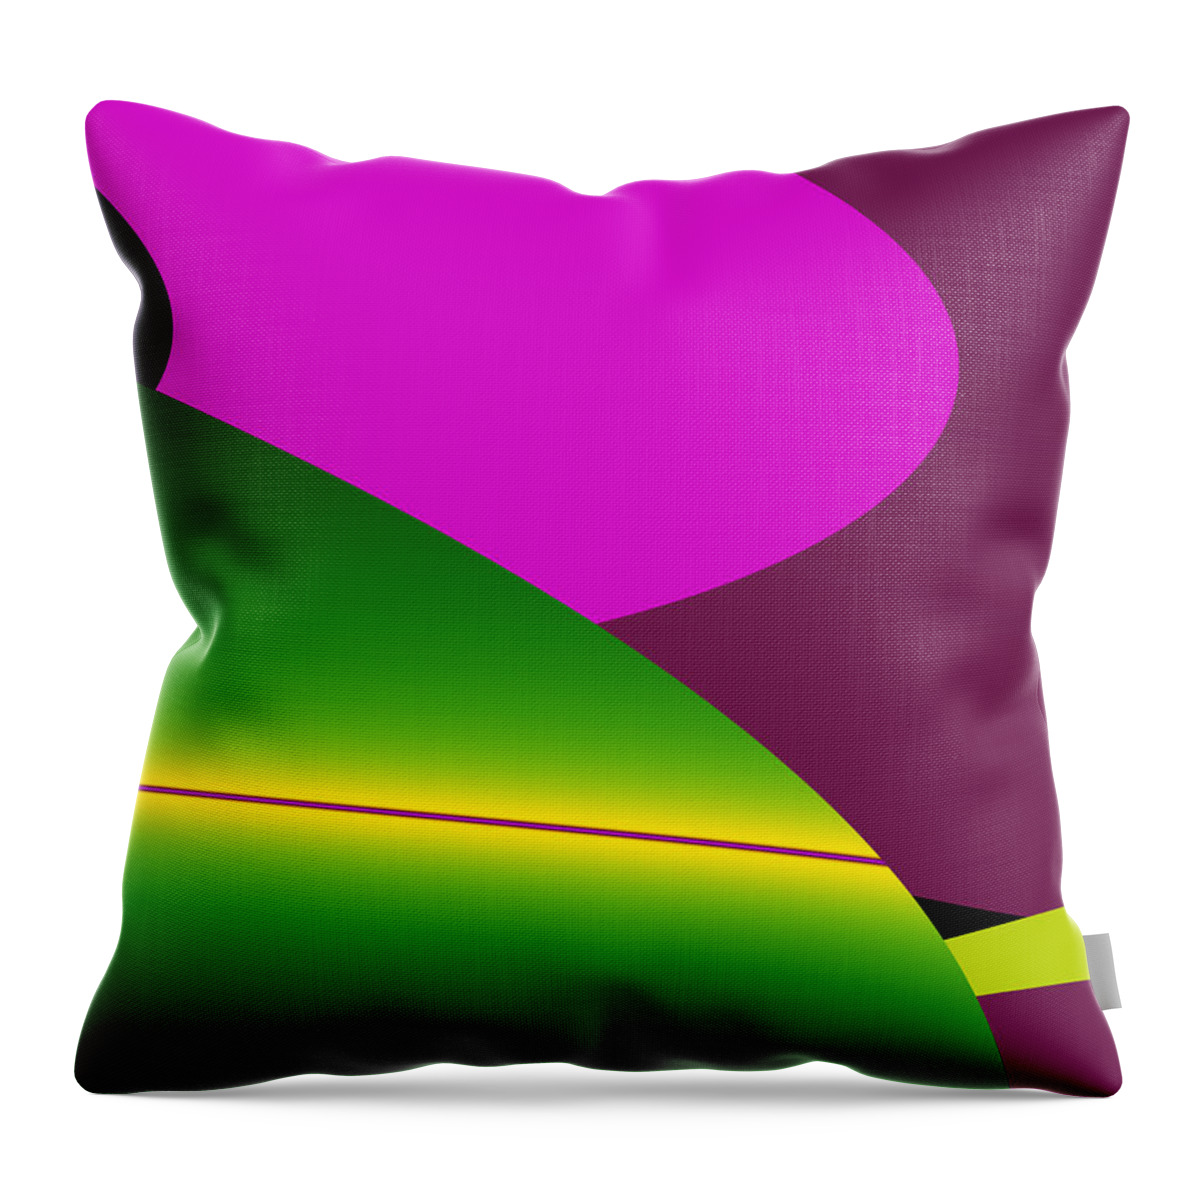 Art Throw Pillow featuring the digital art Settin' Me Up by Jeff Iverson